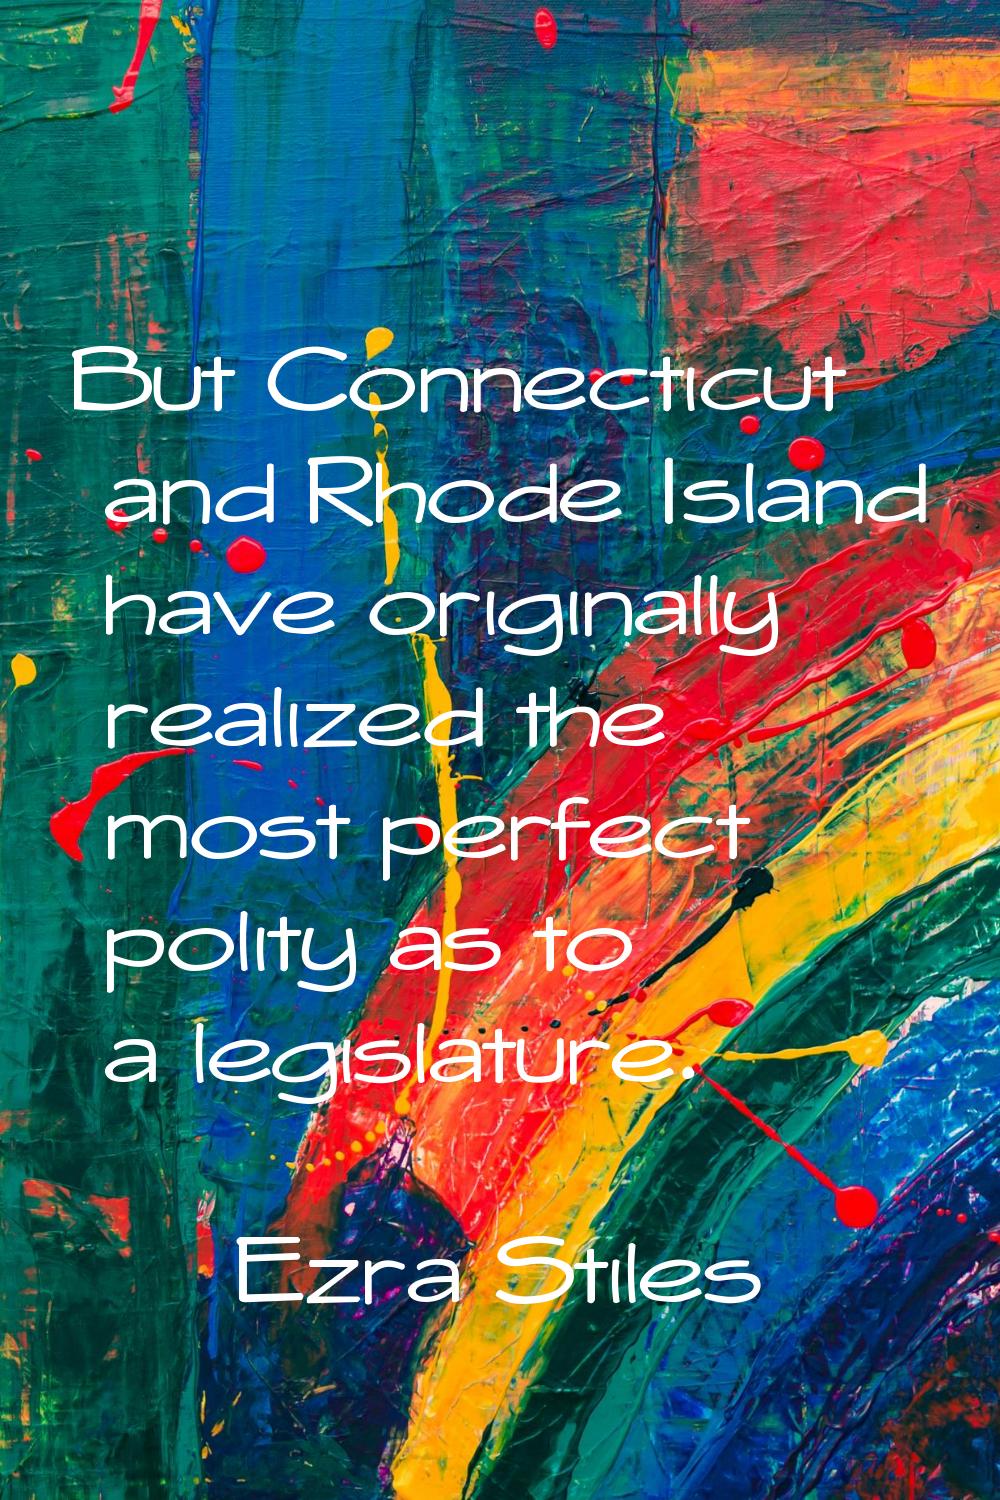 But Connecticut and Rhode Island have originally realized the most perfect polity as to a legislatu